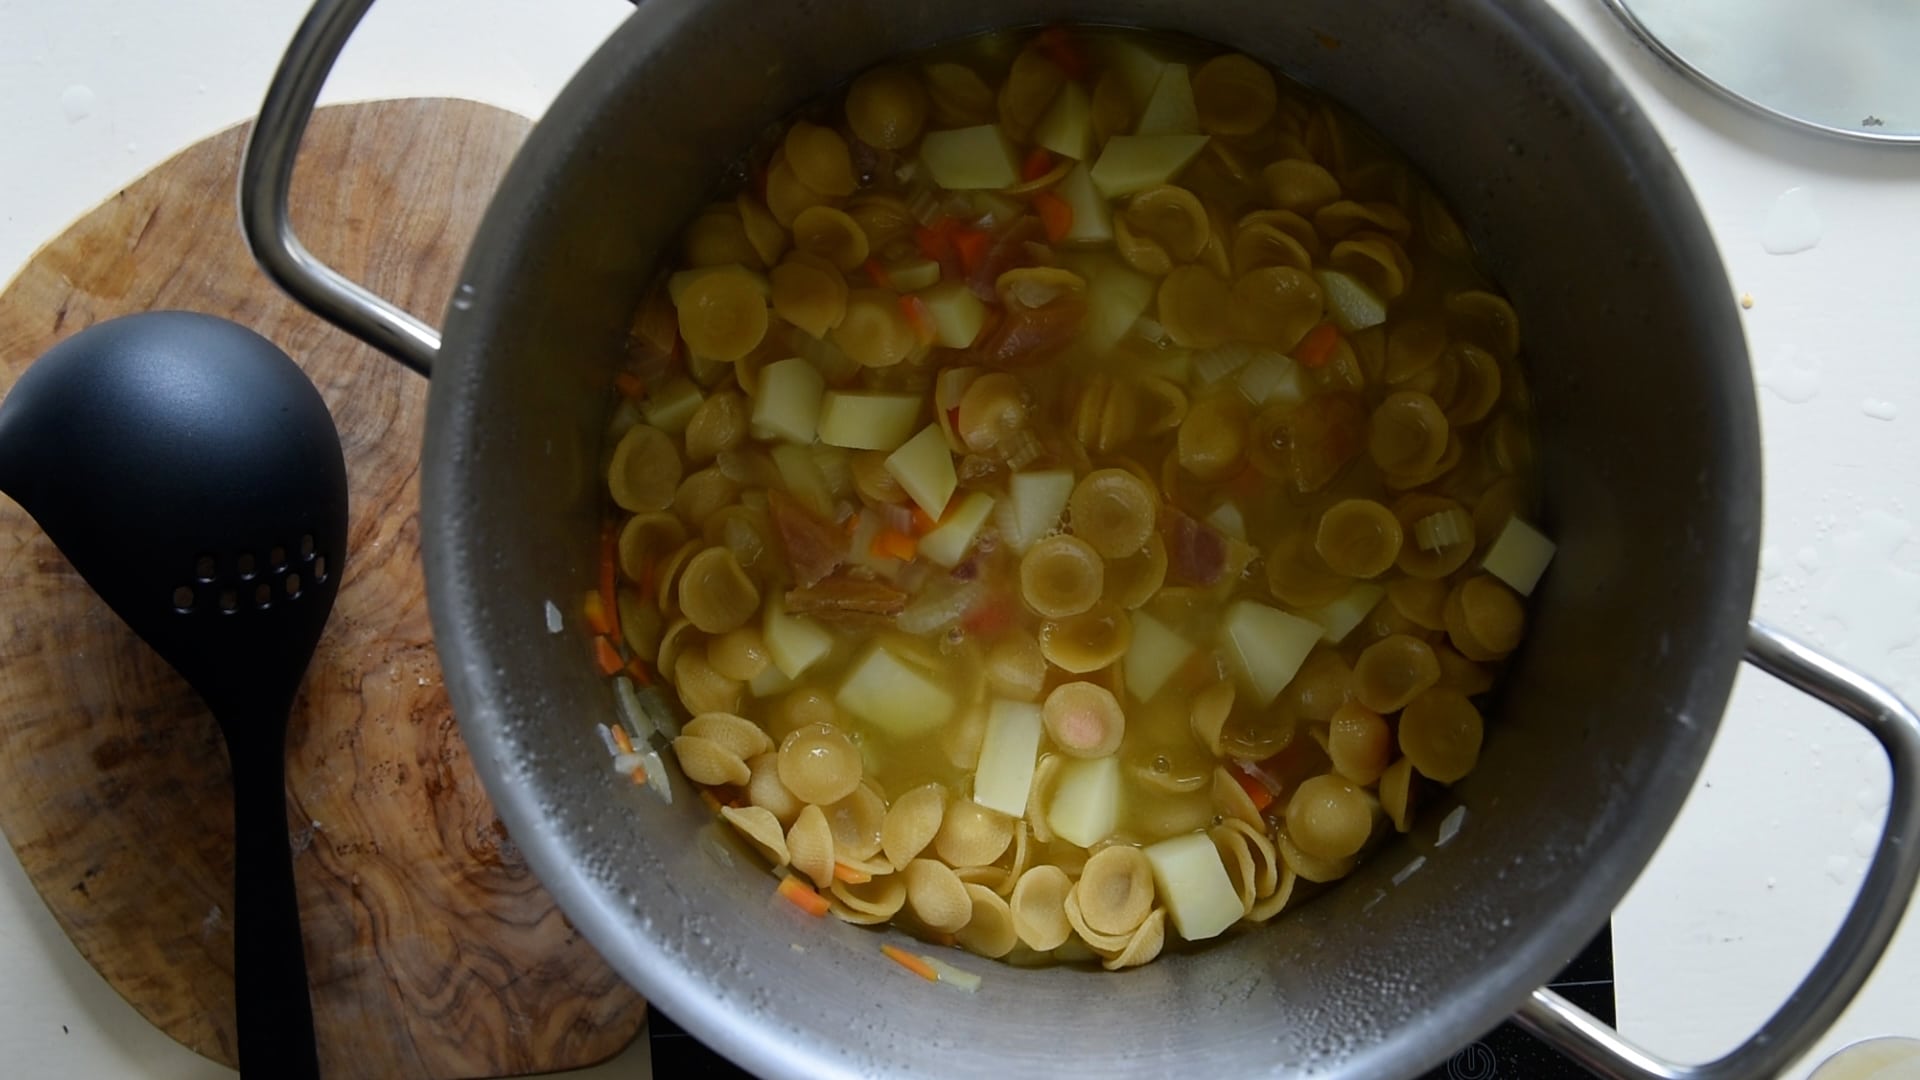 Add more stock to ALMOST cover the pasta, do not submerge it